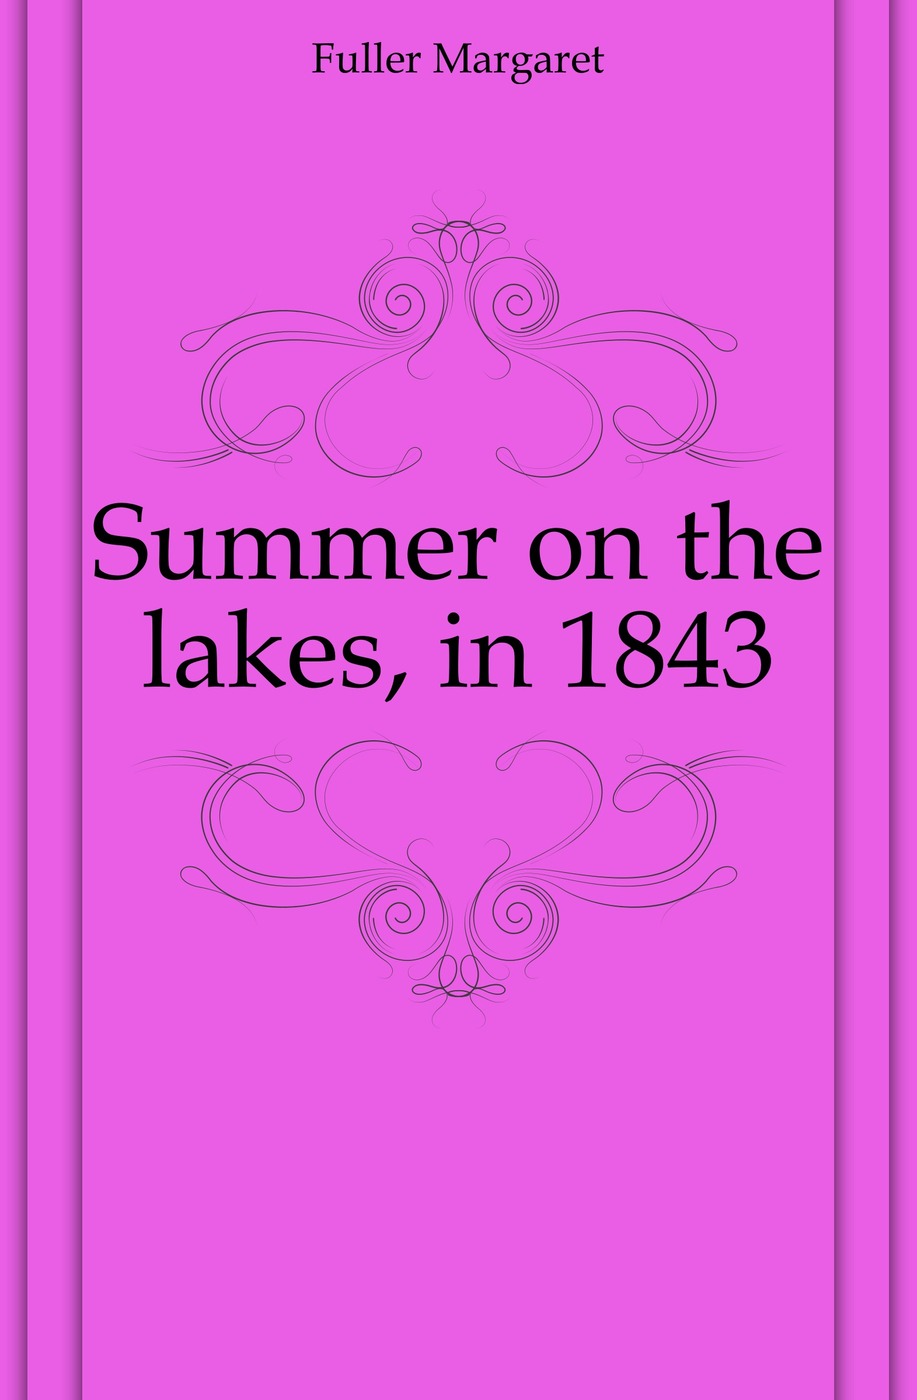 Summer on the lakes, in 1843